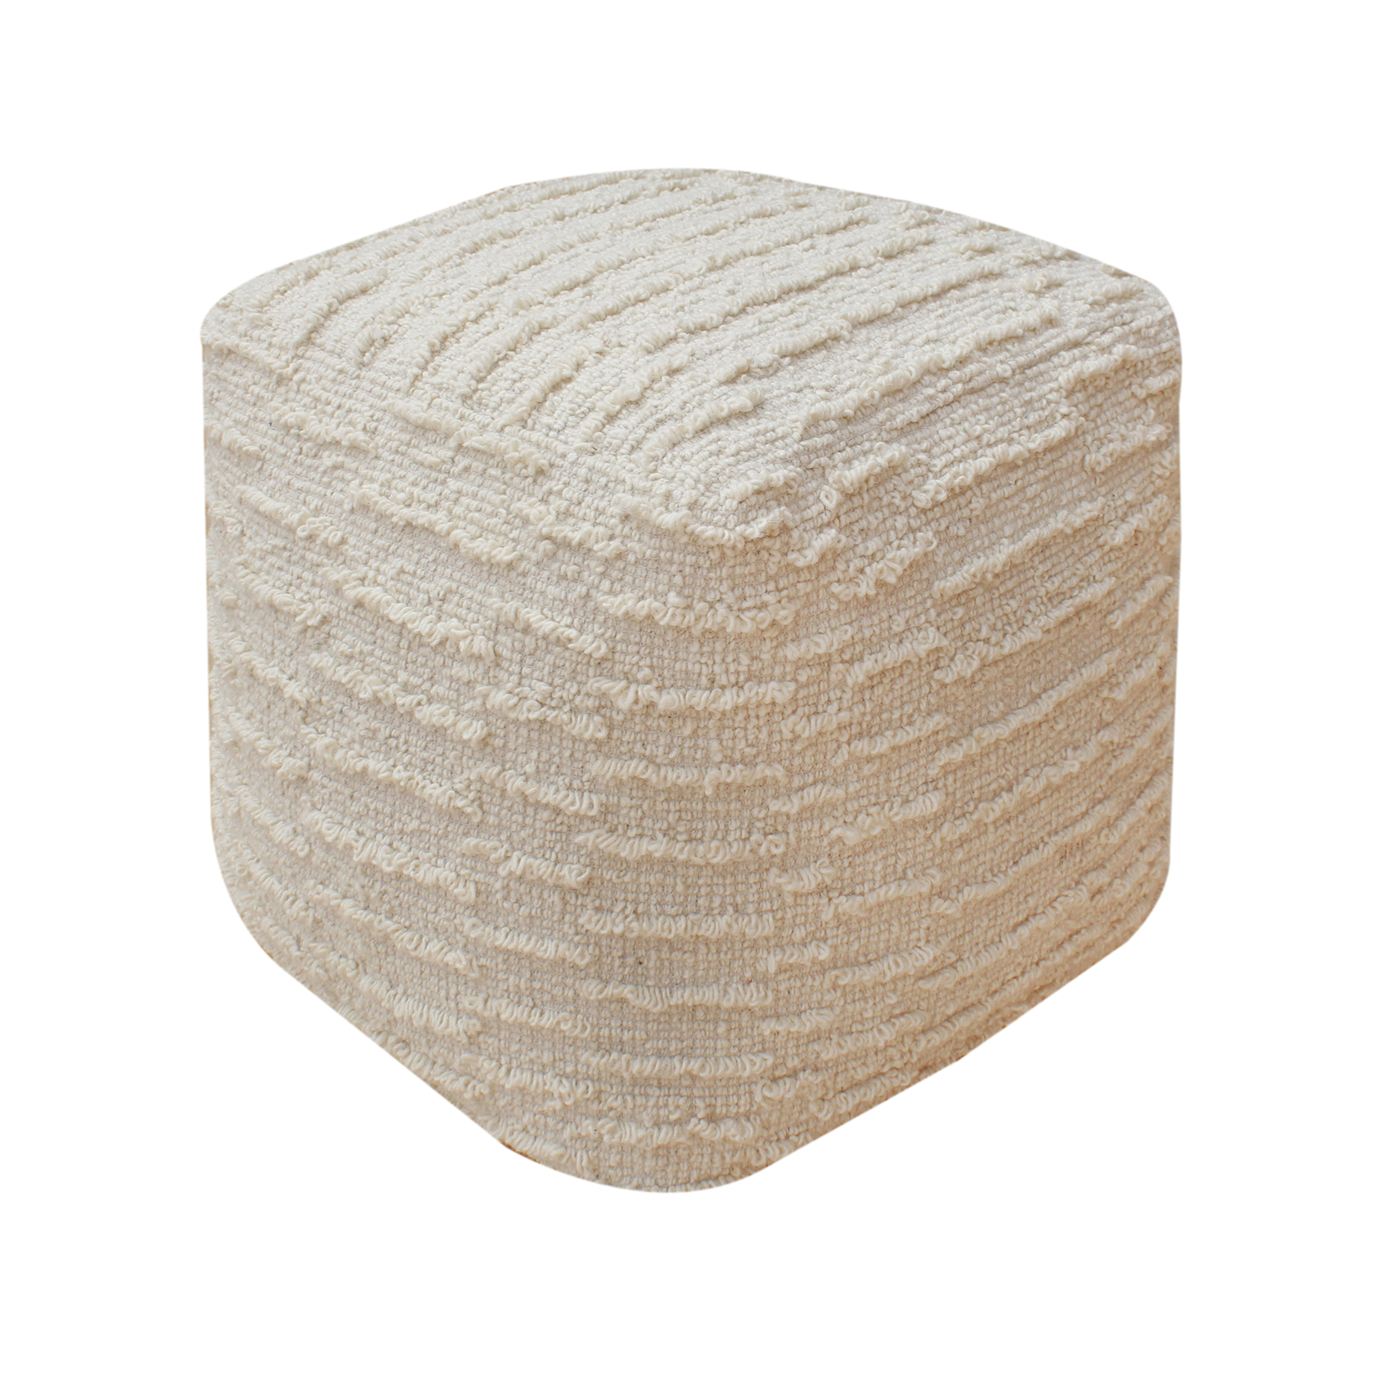 Kribul Pouf, Wool, Natural White, Hand woven, All Loop 